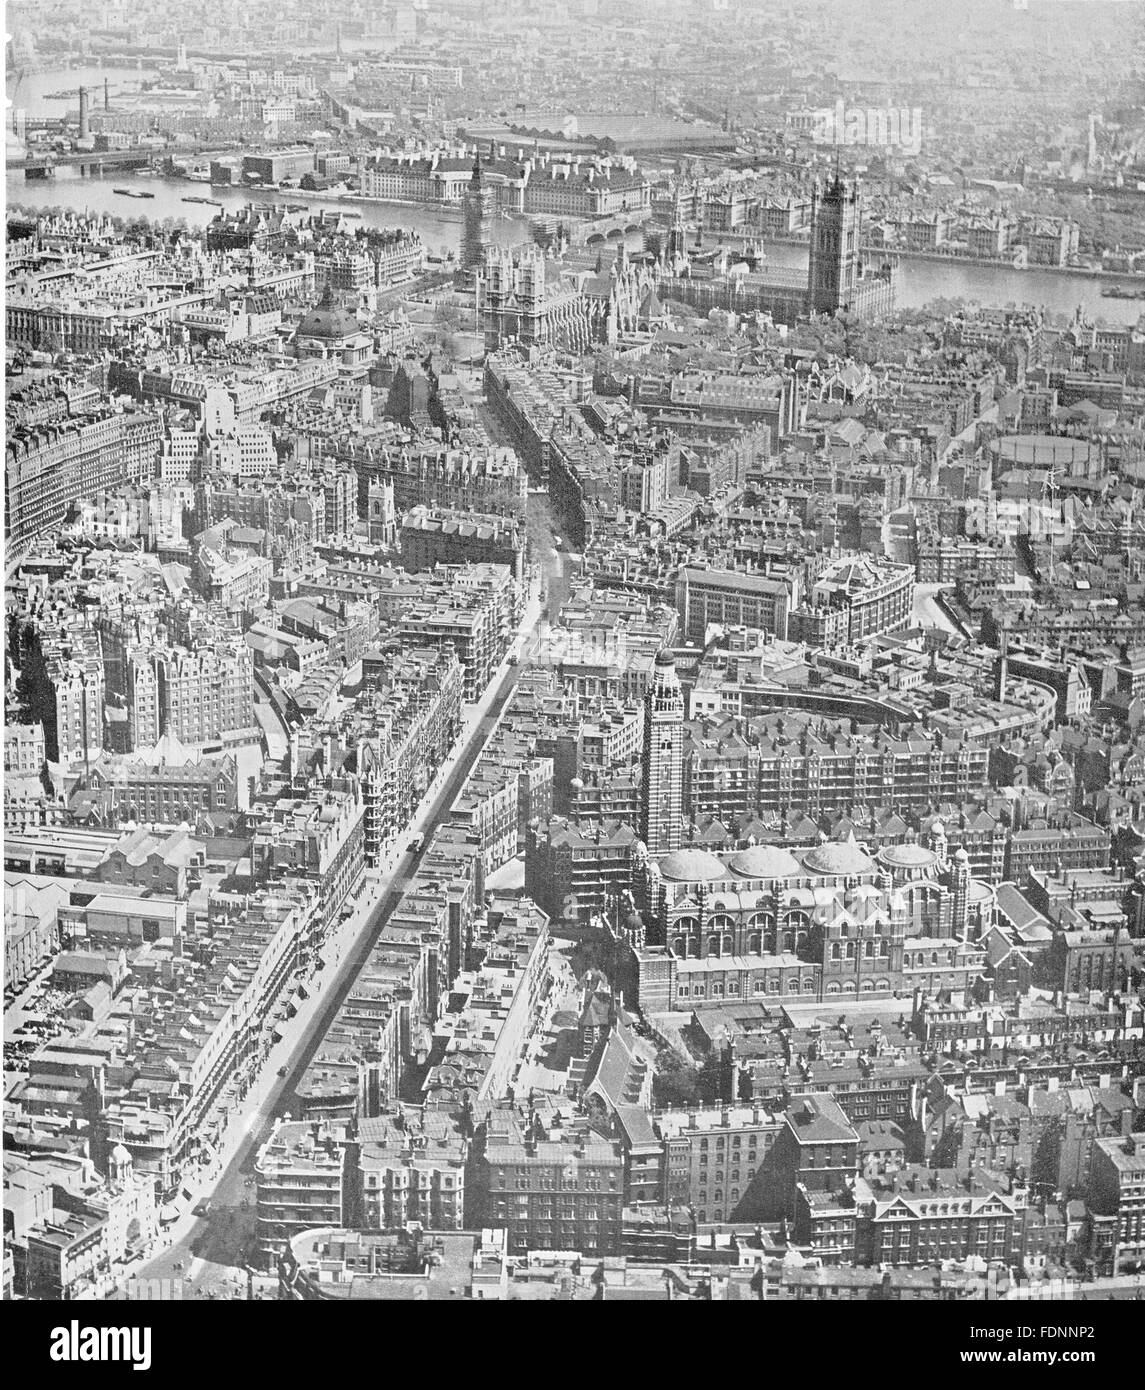 LONDON: Victoria Street and the Westminster Precinct Area, vintage print 1943 Stock Photo